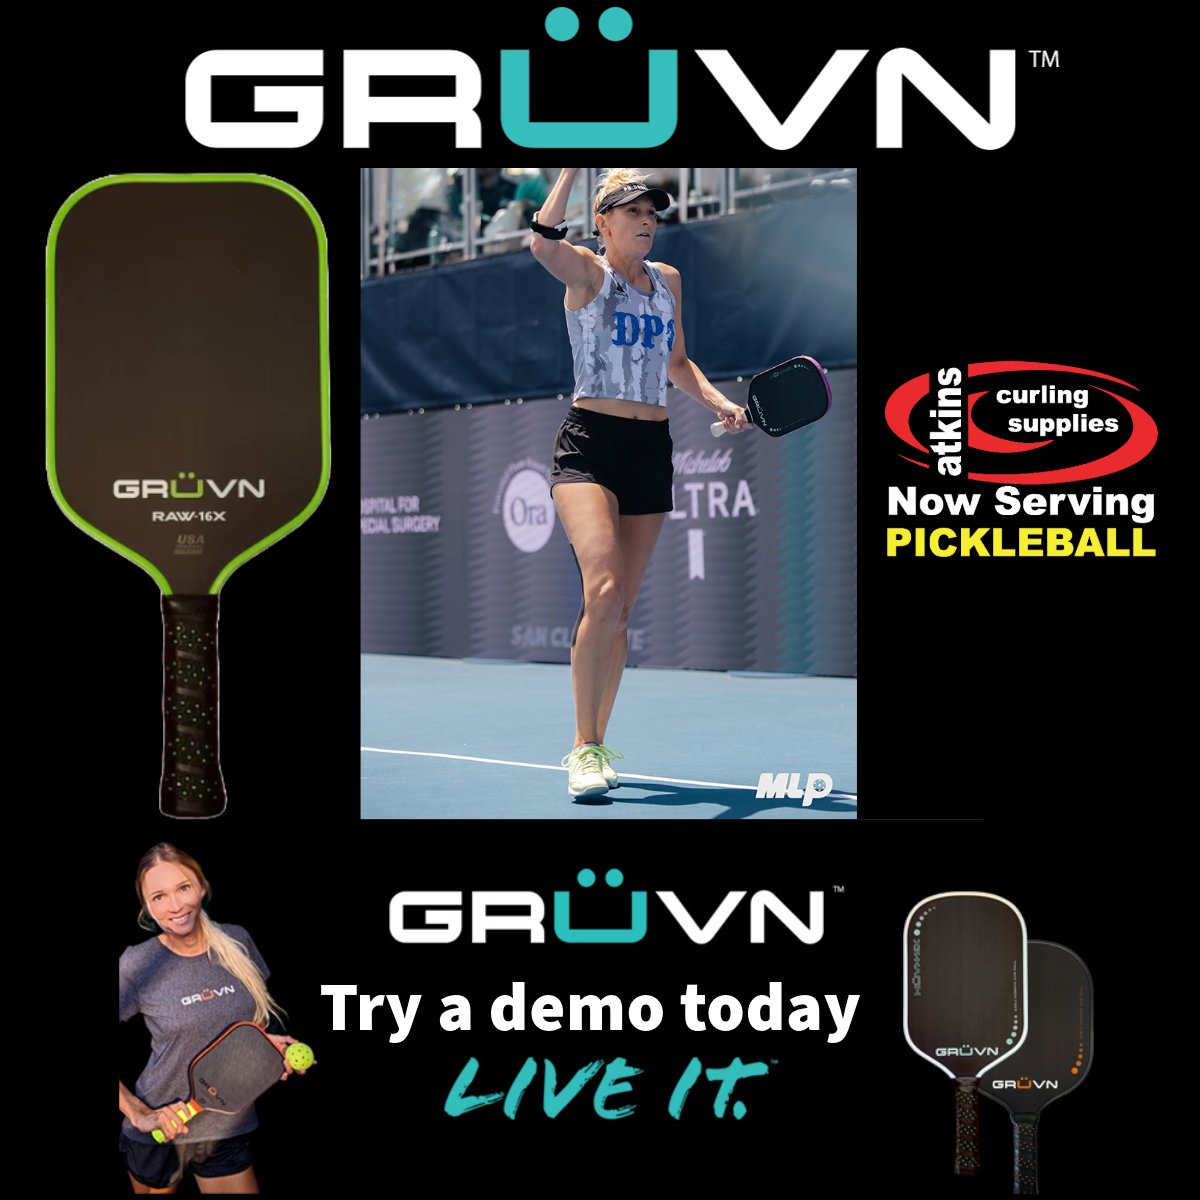 🎾New Arrival Alert!🎾
👟GRUVN Pickleball Paddles Now In Stock!🙌
Used by some of the Major League Pickleball pro's...
Now available in Winnipeg at Atkins Curling Supplies
Try out a Demo paddle before you buy! #PickleballPassion
 #GRUVN #PickleballMB #winnipegwestpickleballclub